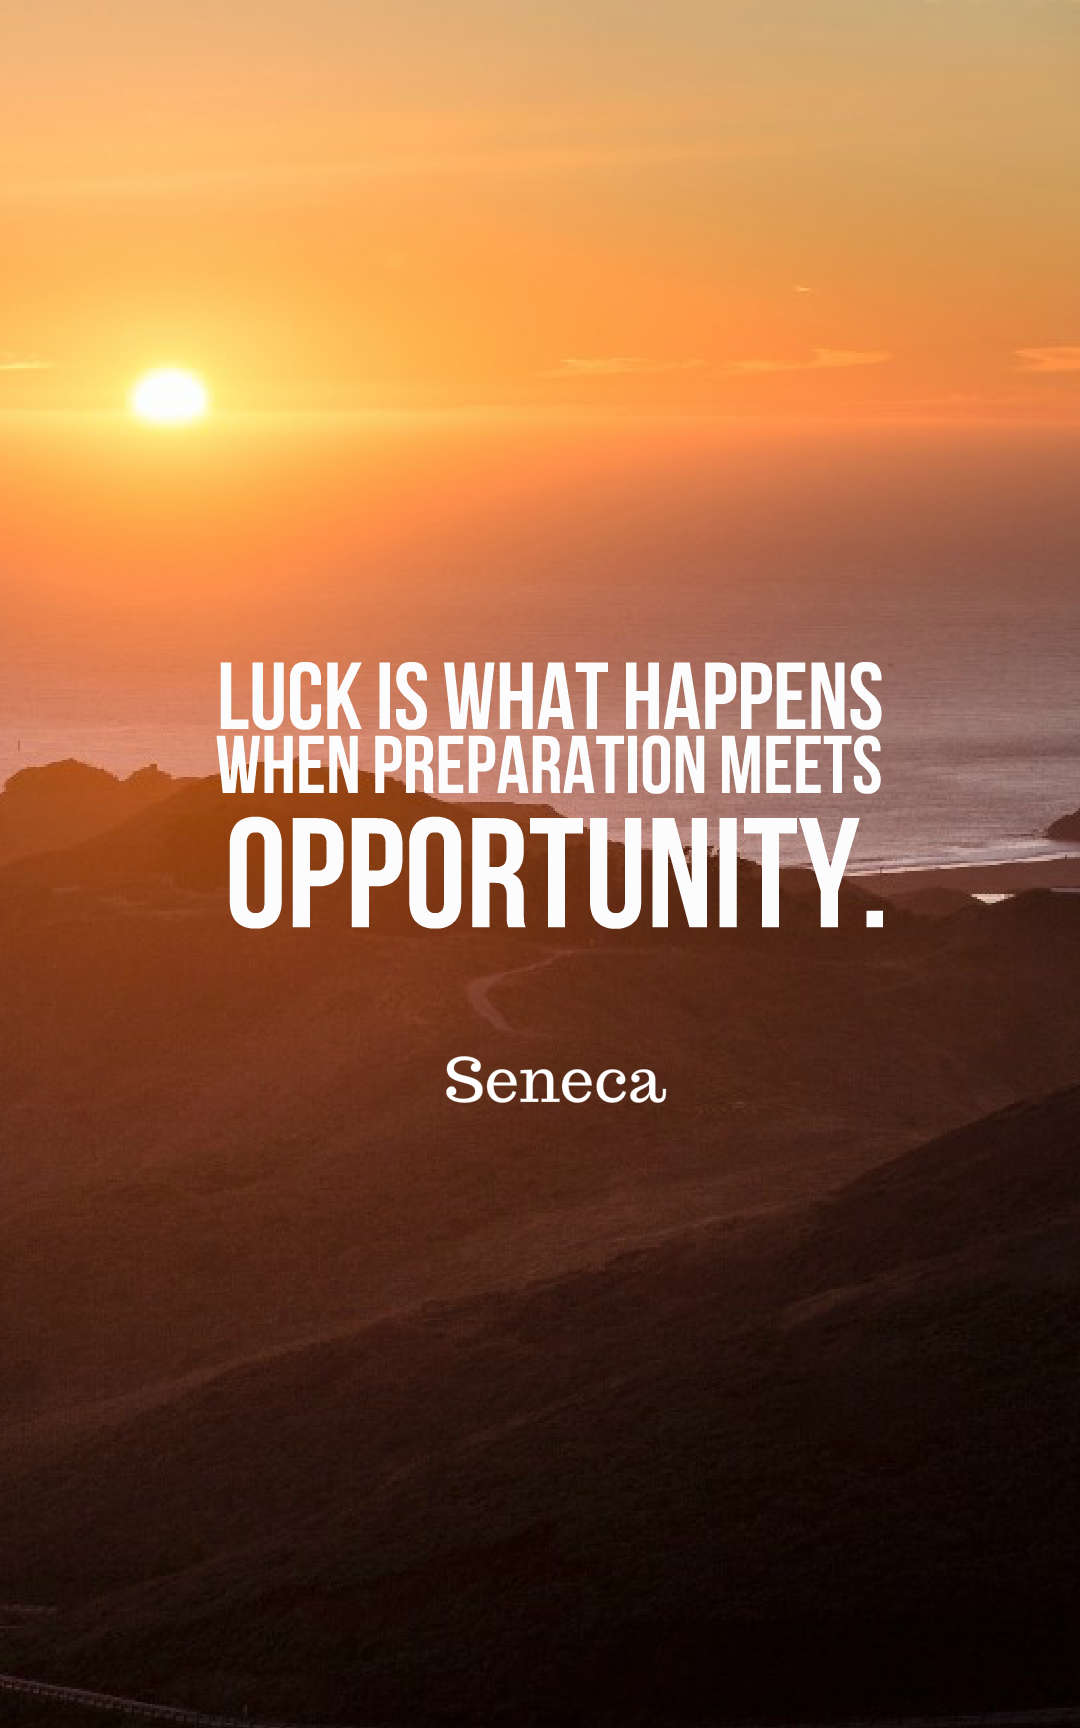 Luck is what happens when preparation meets opportunity.